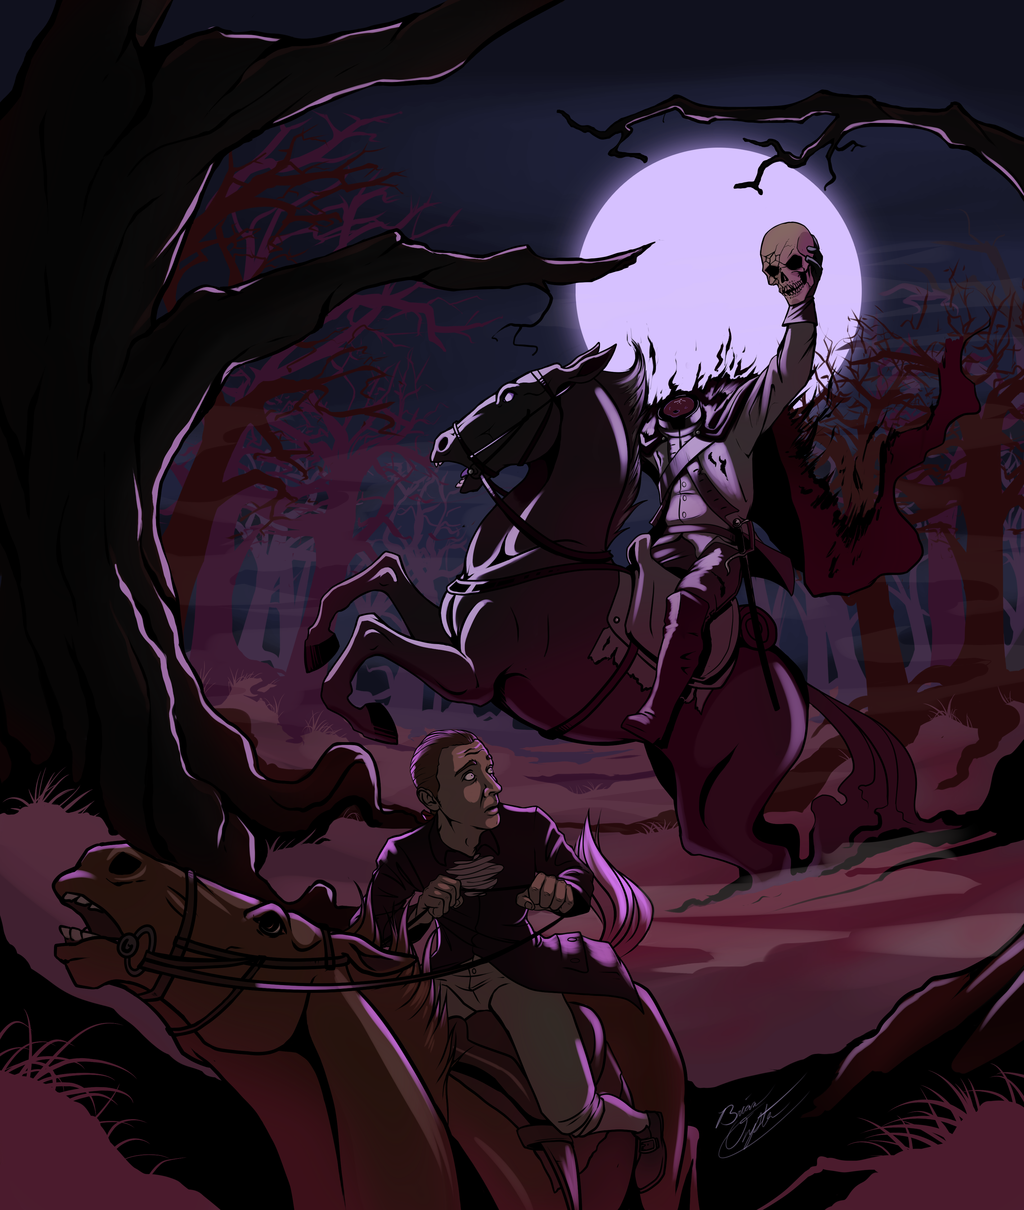 The Headless Horseman Rides By Brianboyster